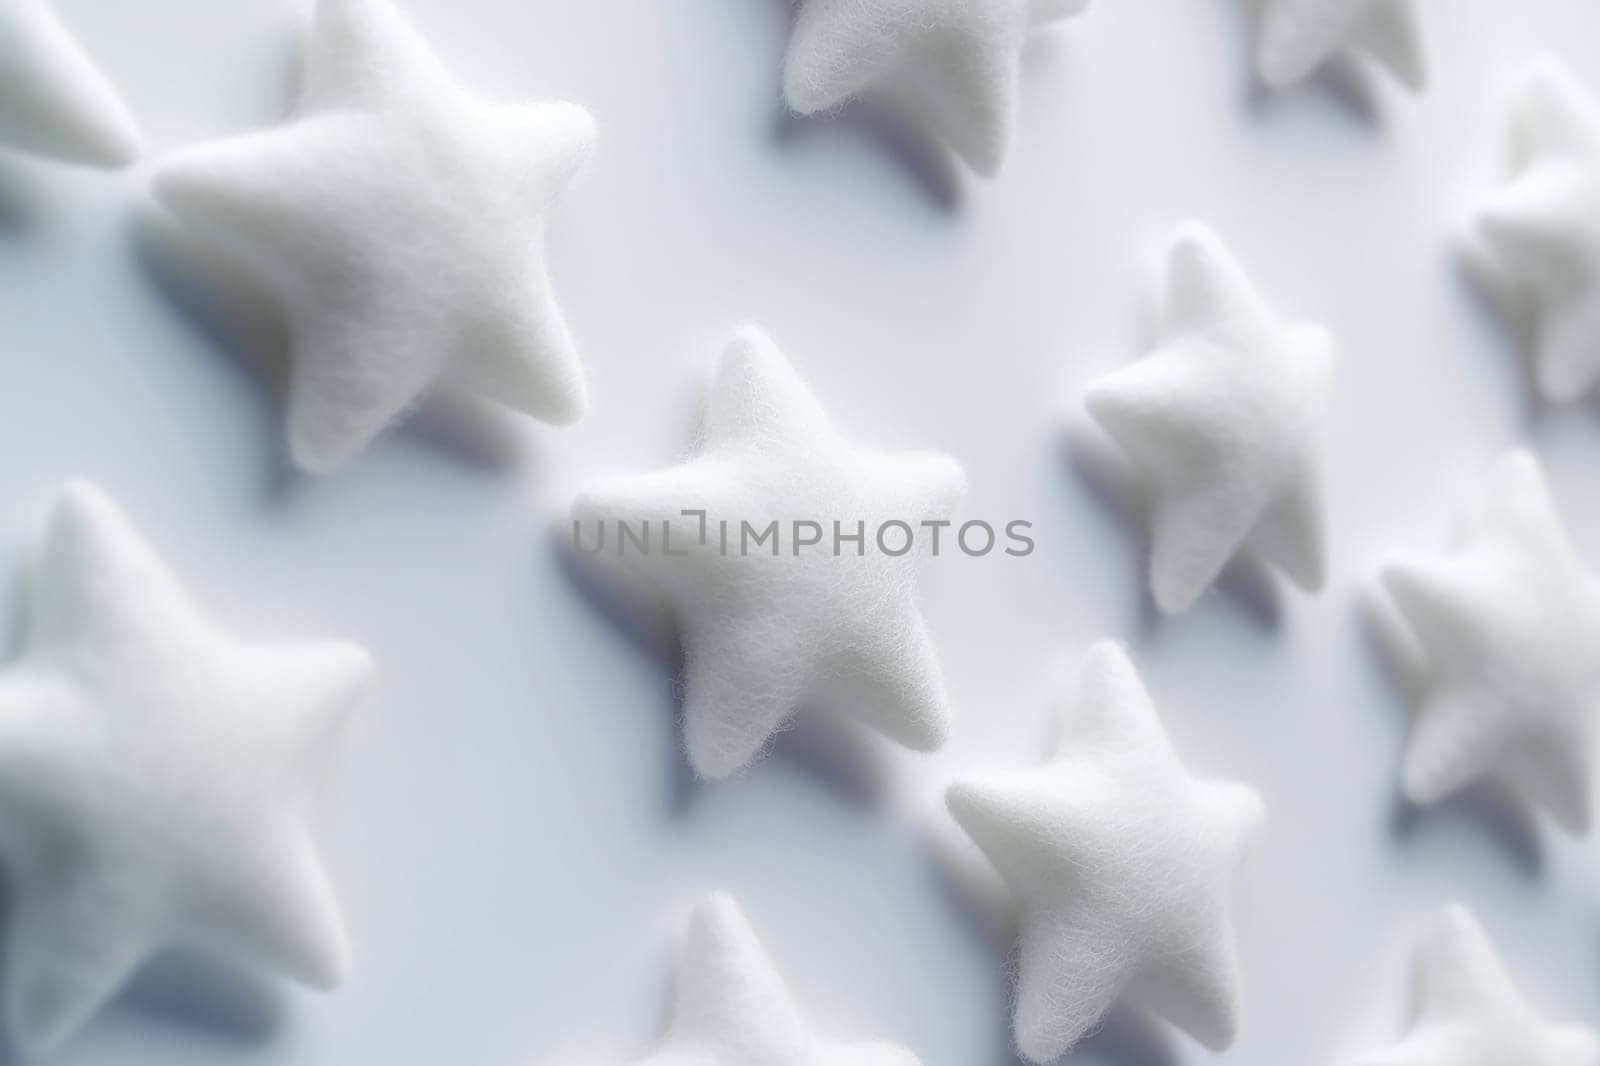 Uniform white star shapes arranged on a plain background by Hype2art